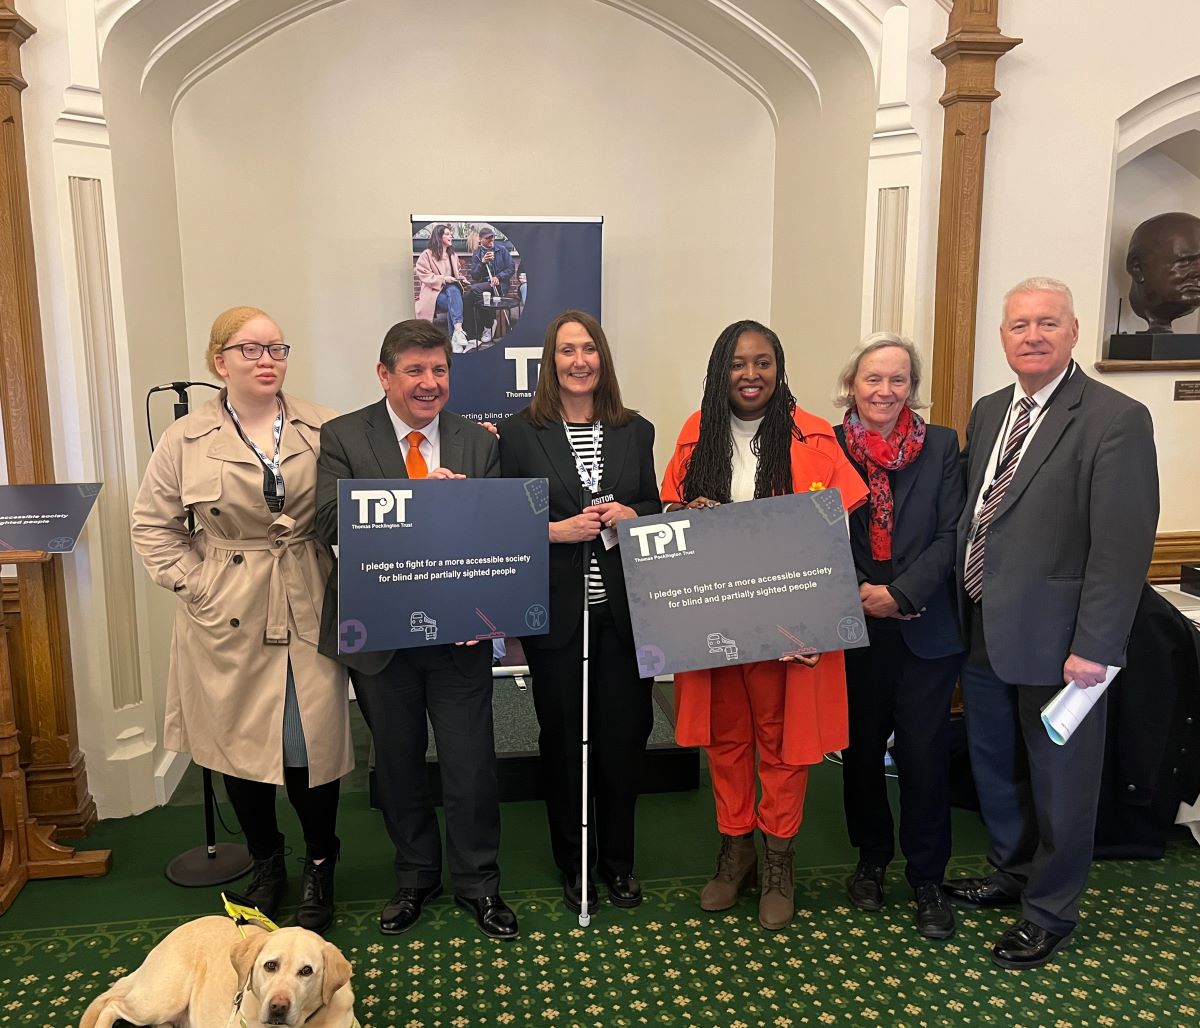 Image shows TPT staff and MPs in a group photo with MPs holding our pledge boards. A TPT banner is in the back, as well as a guide dog lying on the floor, in the bottom left.